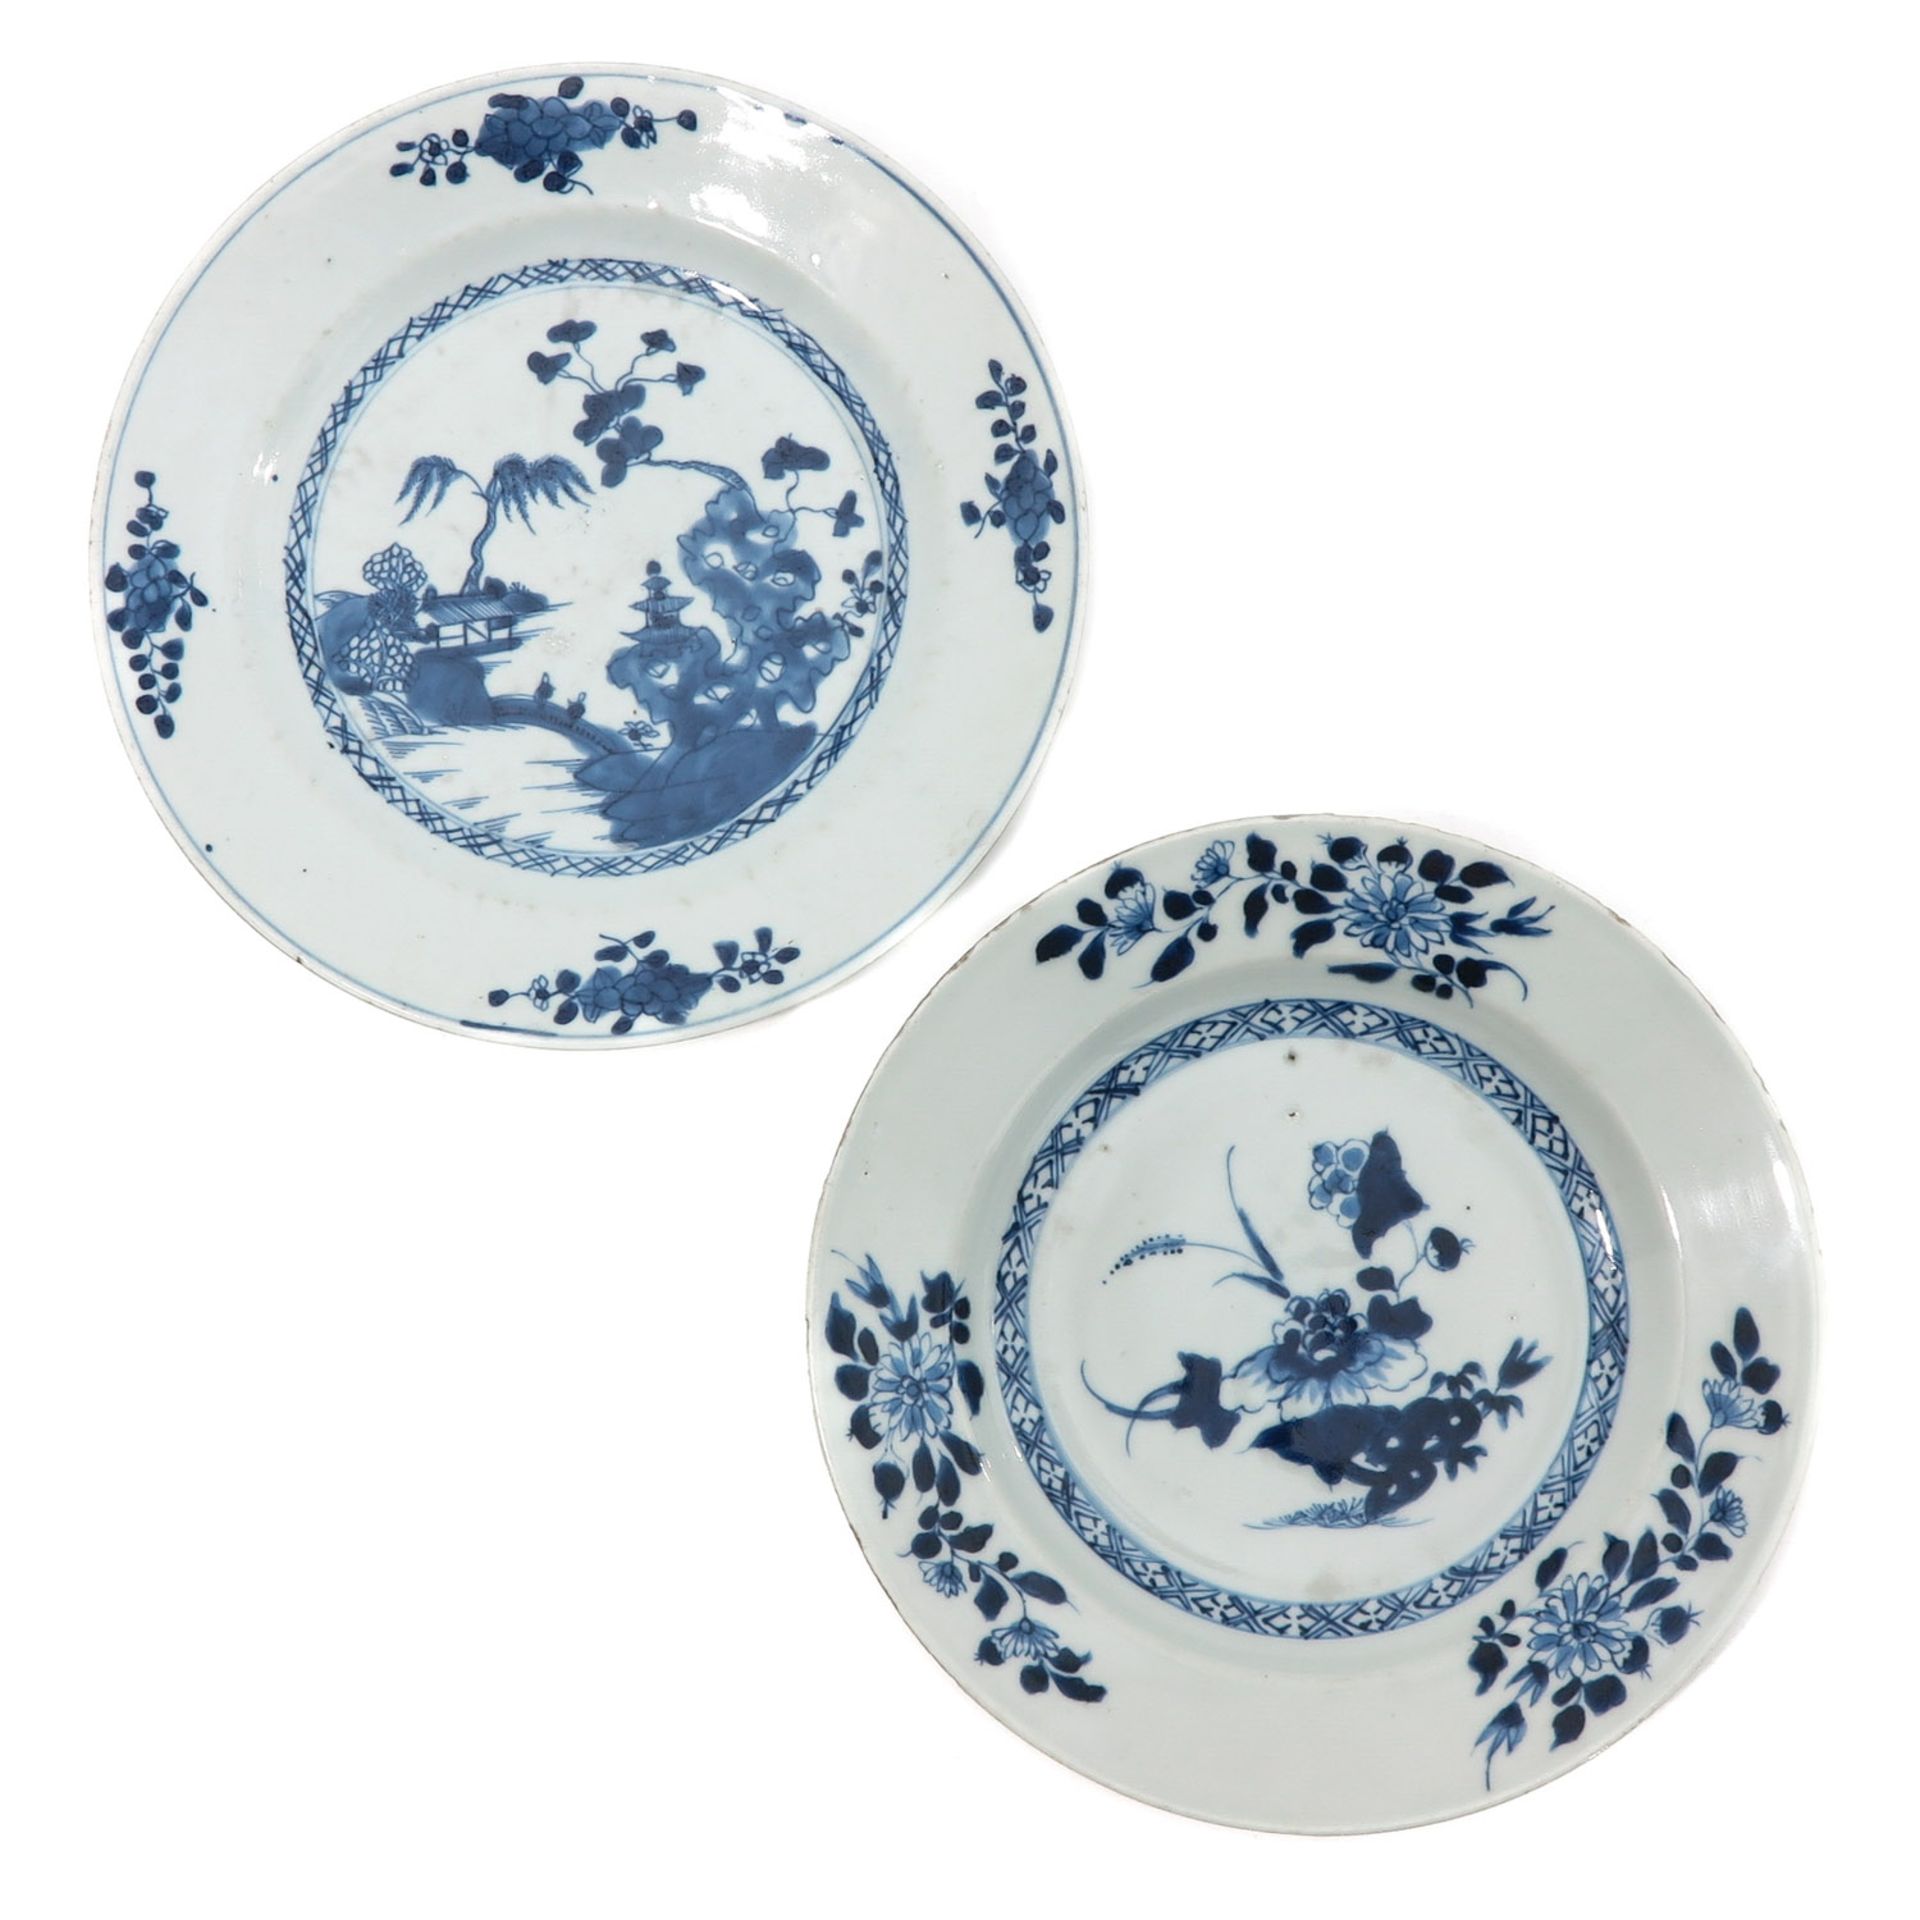 A Collection of 4 Blue and White Plates - Image 5 of 10